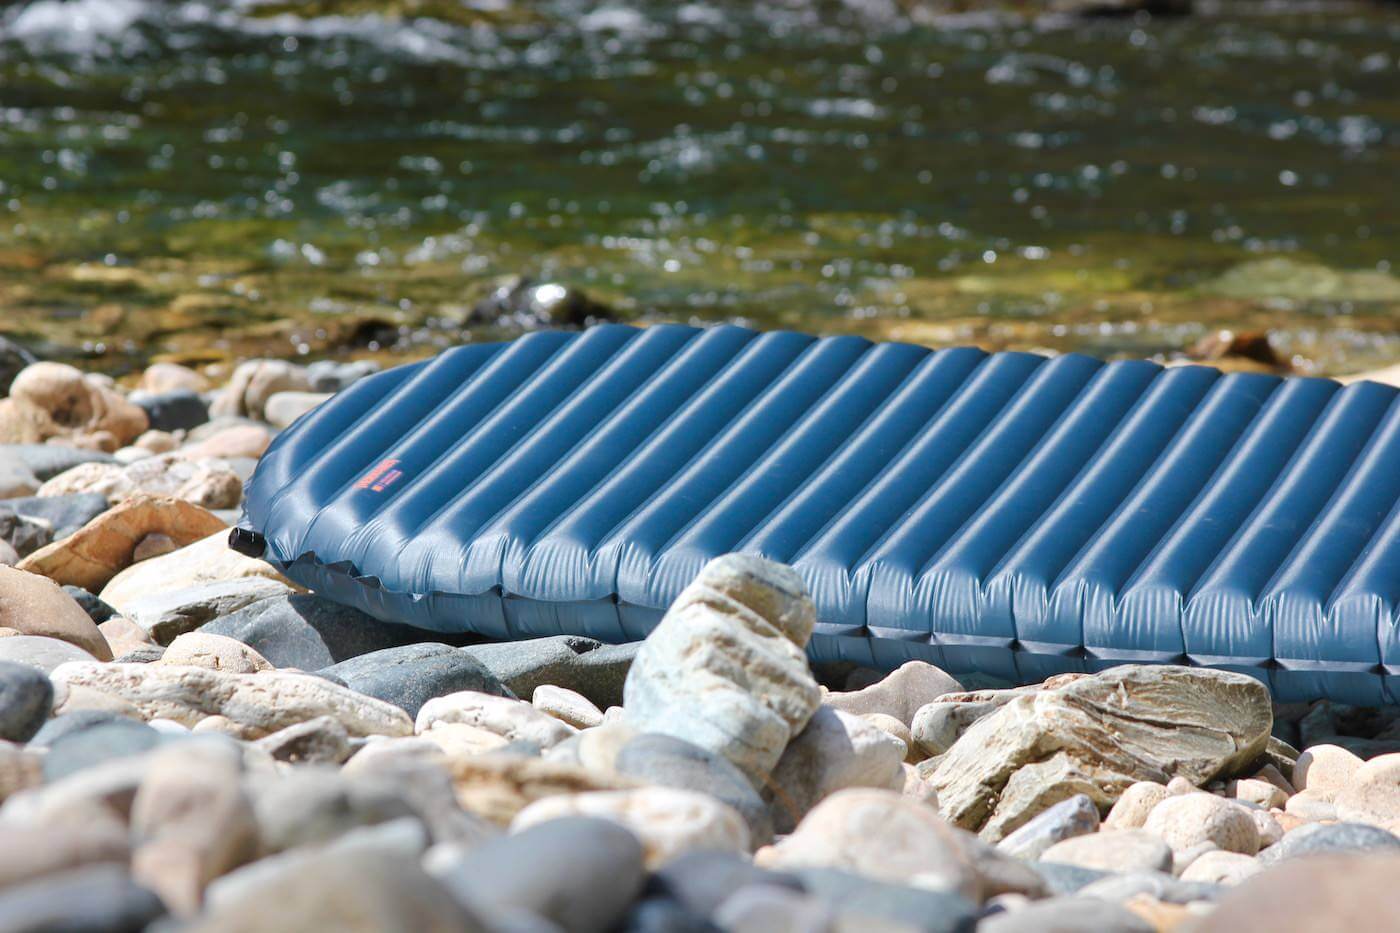 This review photo shows the Therm-a-Rest NeoAir UberLite air mattress outside on some rocks.